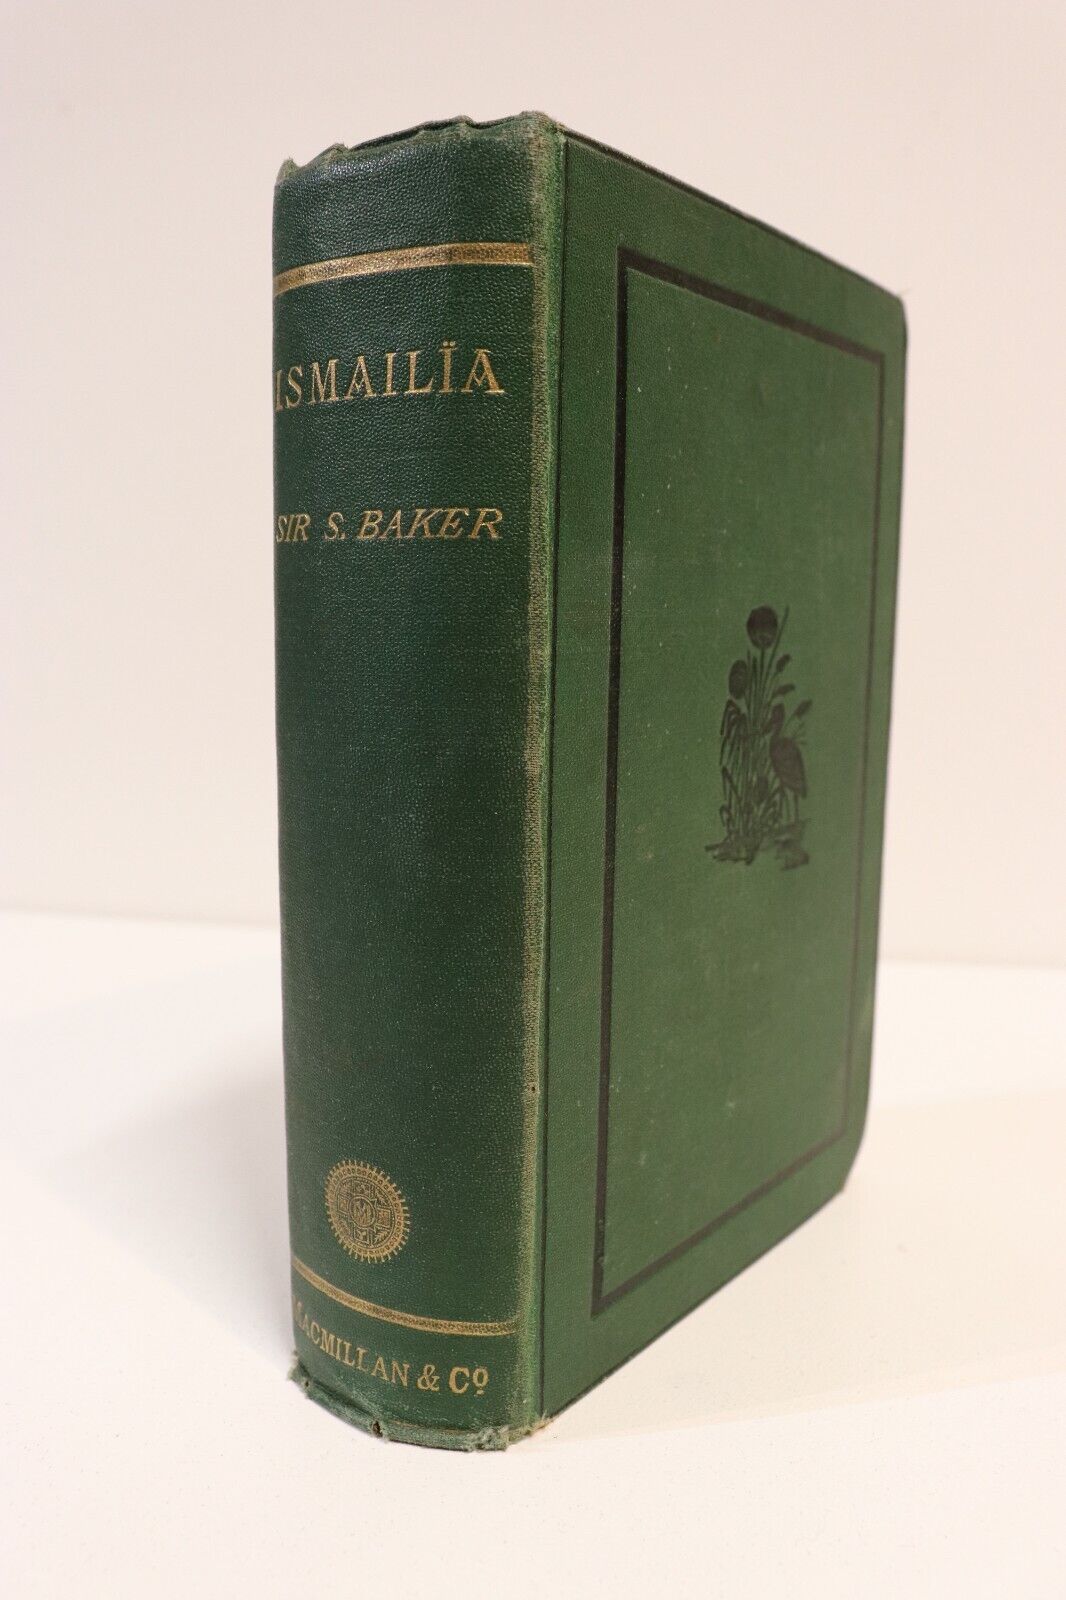 Ismailia: Suppression Of The Slave Trade by S.W. Baker - 1879 - Antique Book